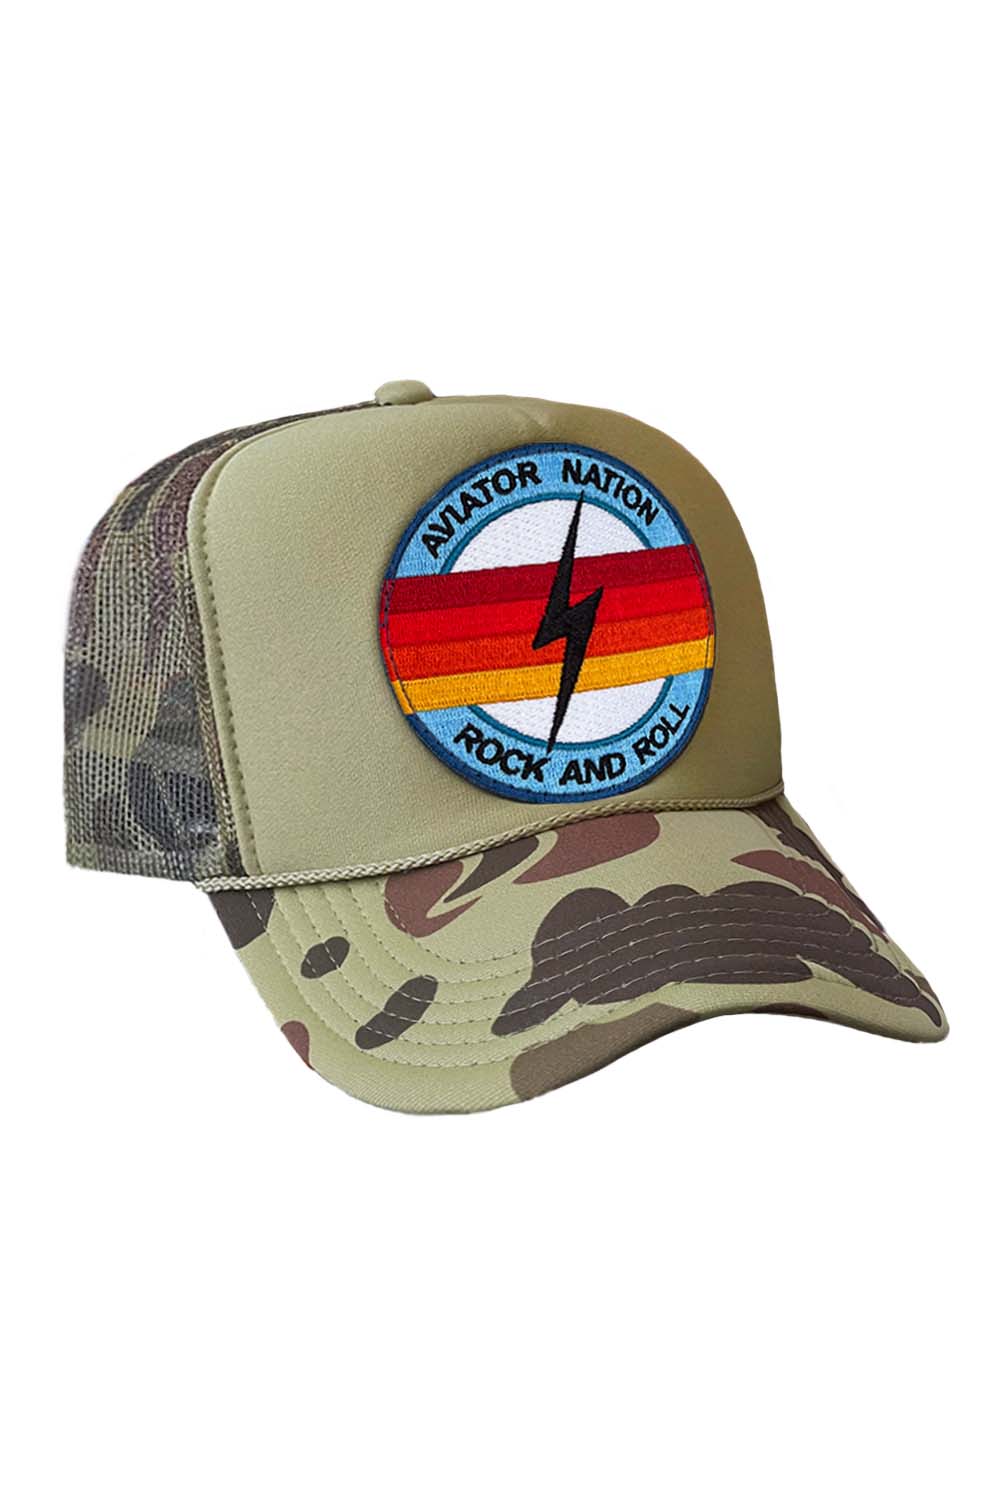 ROCK AND ROLL BOLT VINTAGE TRUCKER HAT HATS Aviator Nation CAMO 